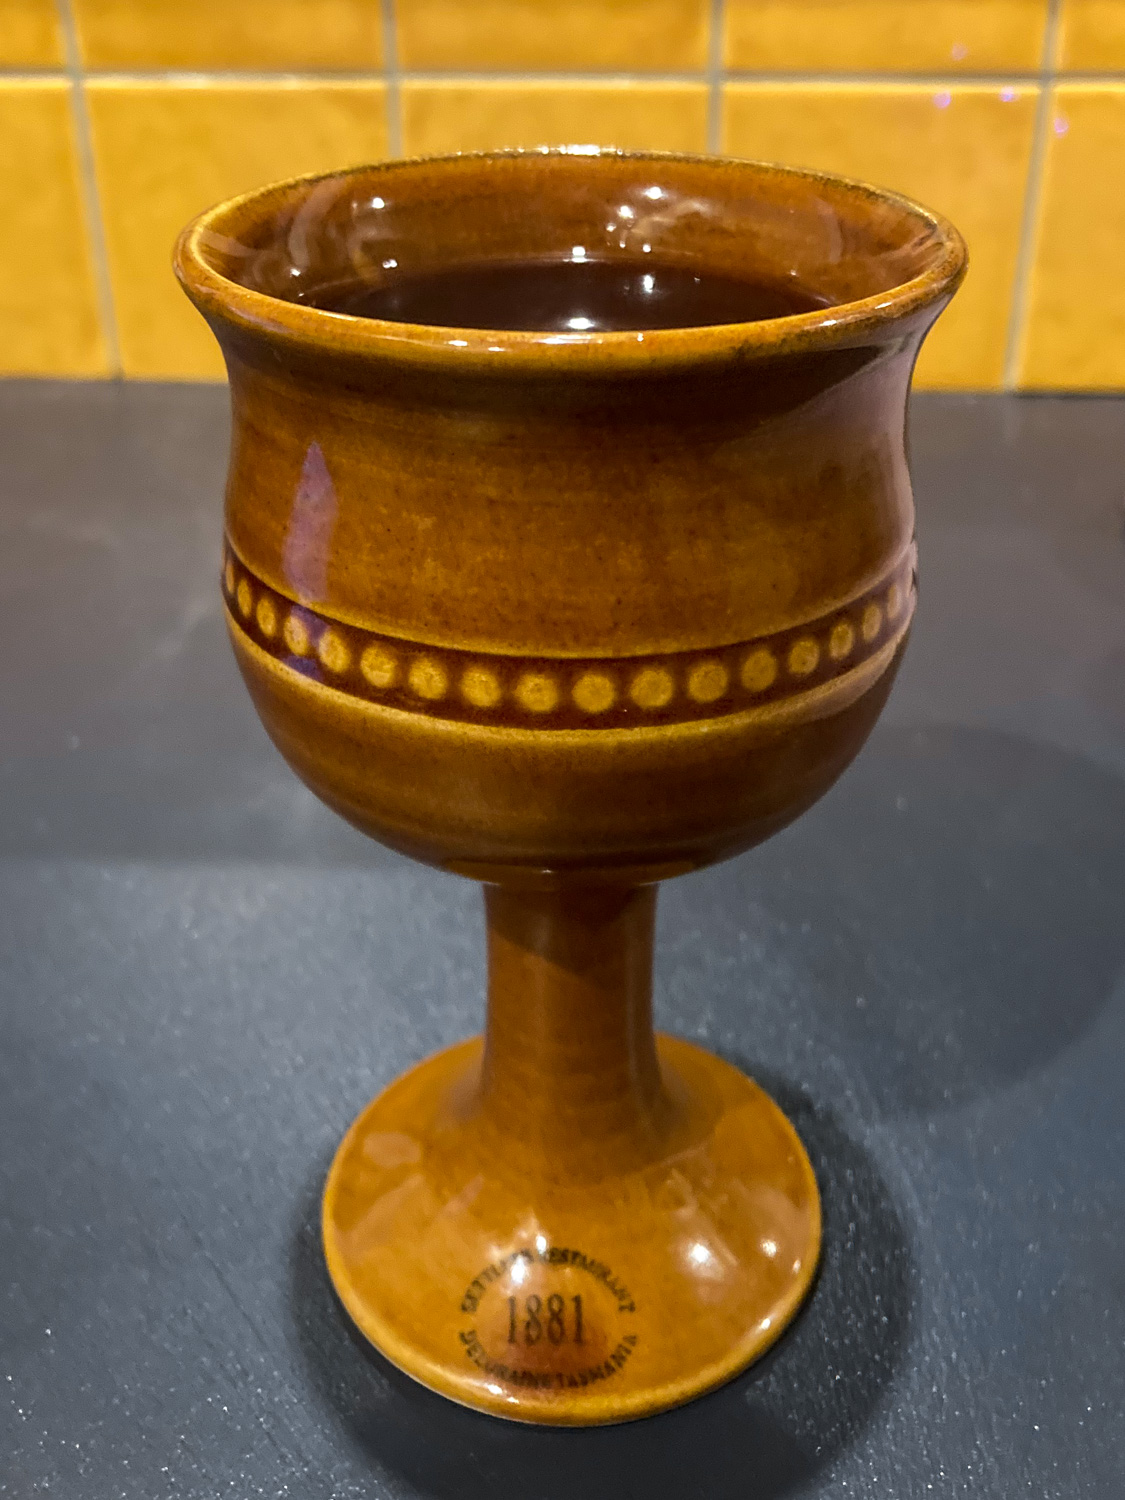 A light brown pottery wine goblet with a dark liquid inside